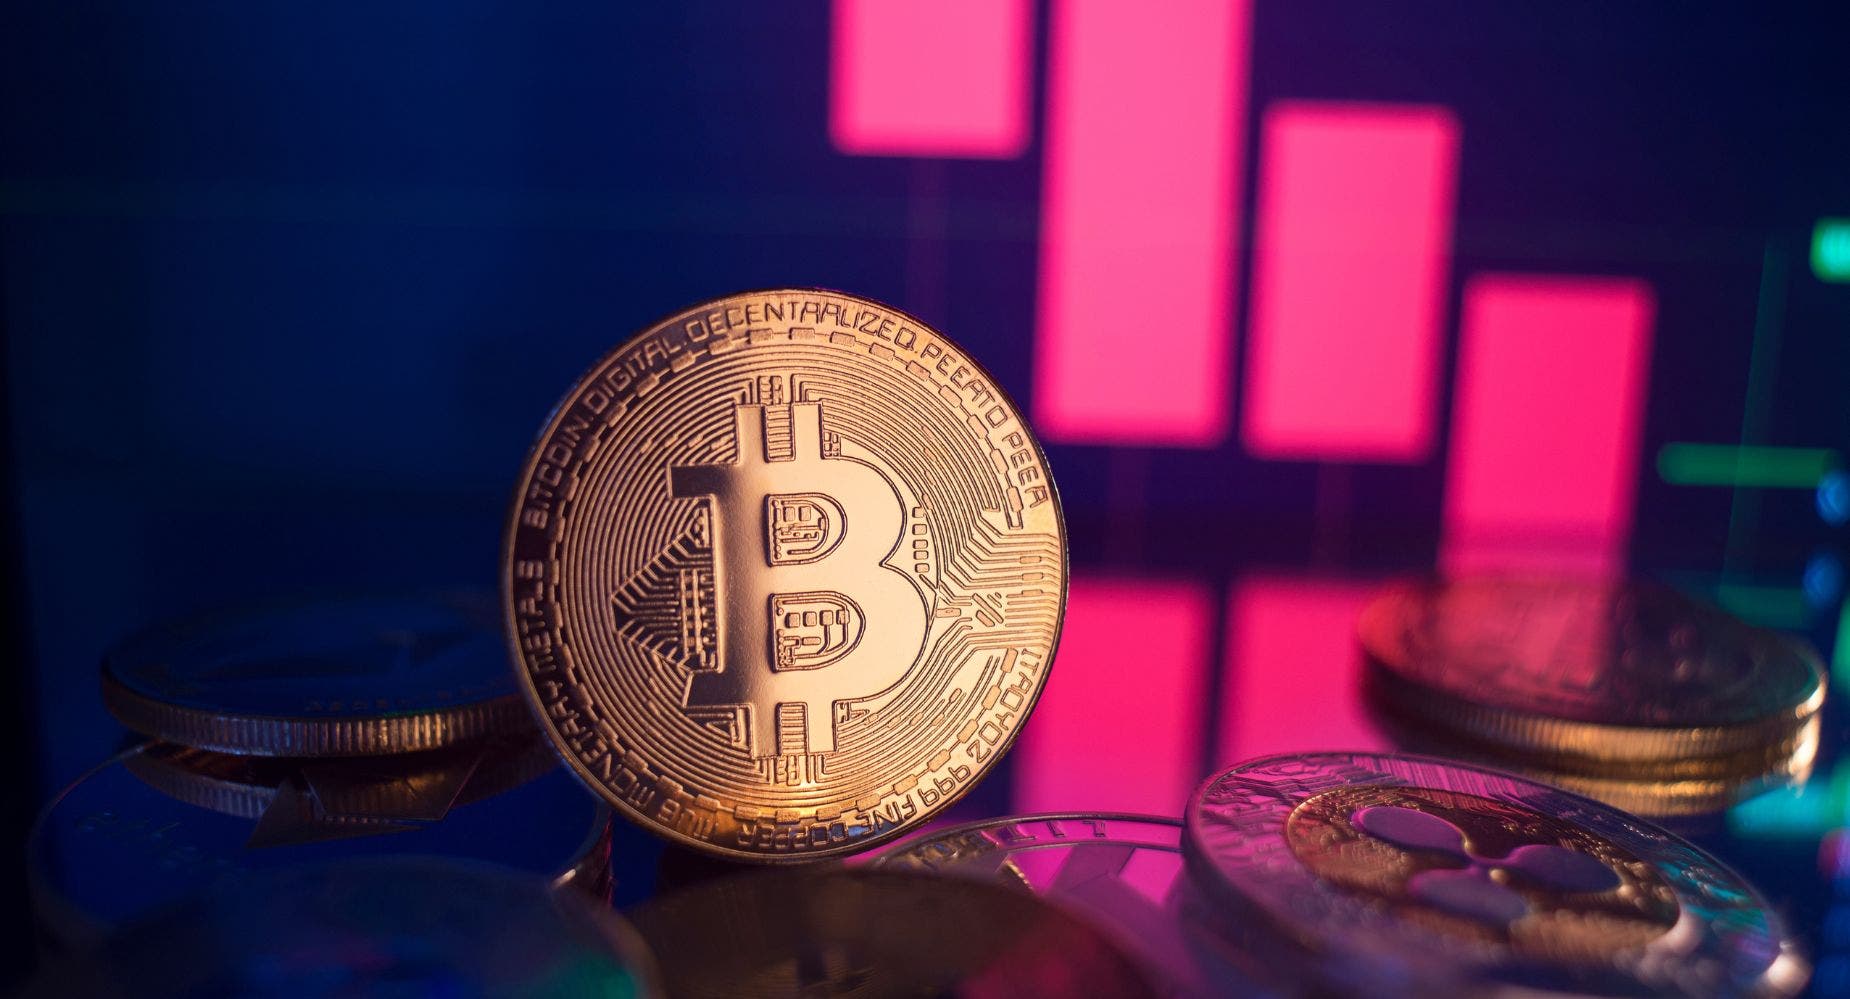 Crypto Expert Warns Of $440 Billion Wipeout, Shares Concerning Prediction About Bitcoin